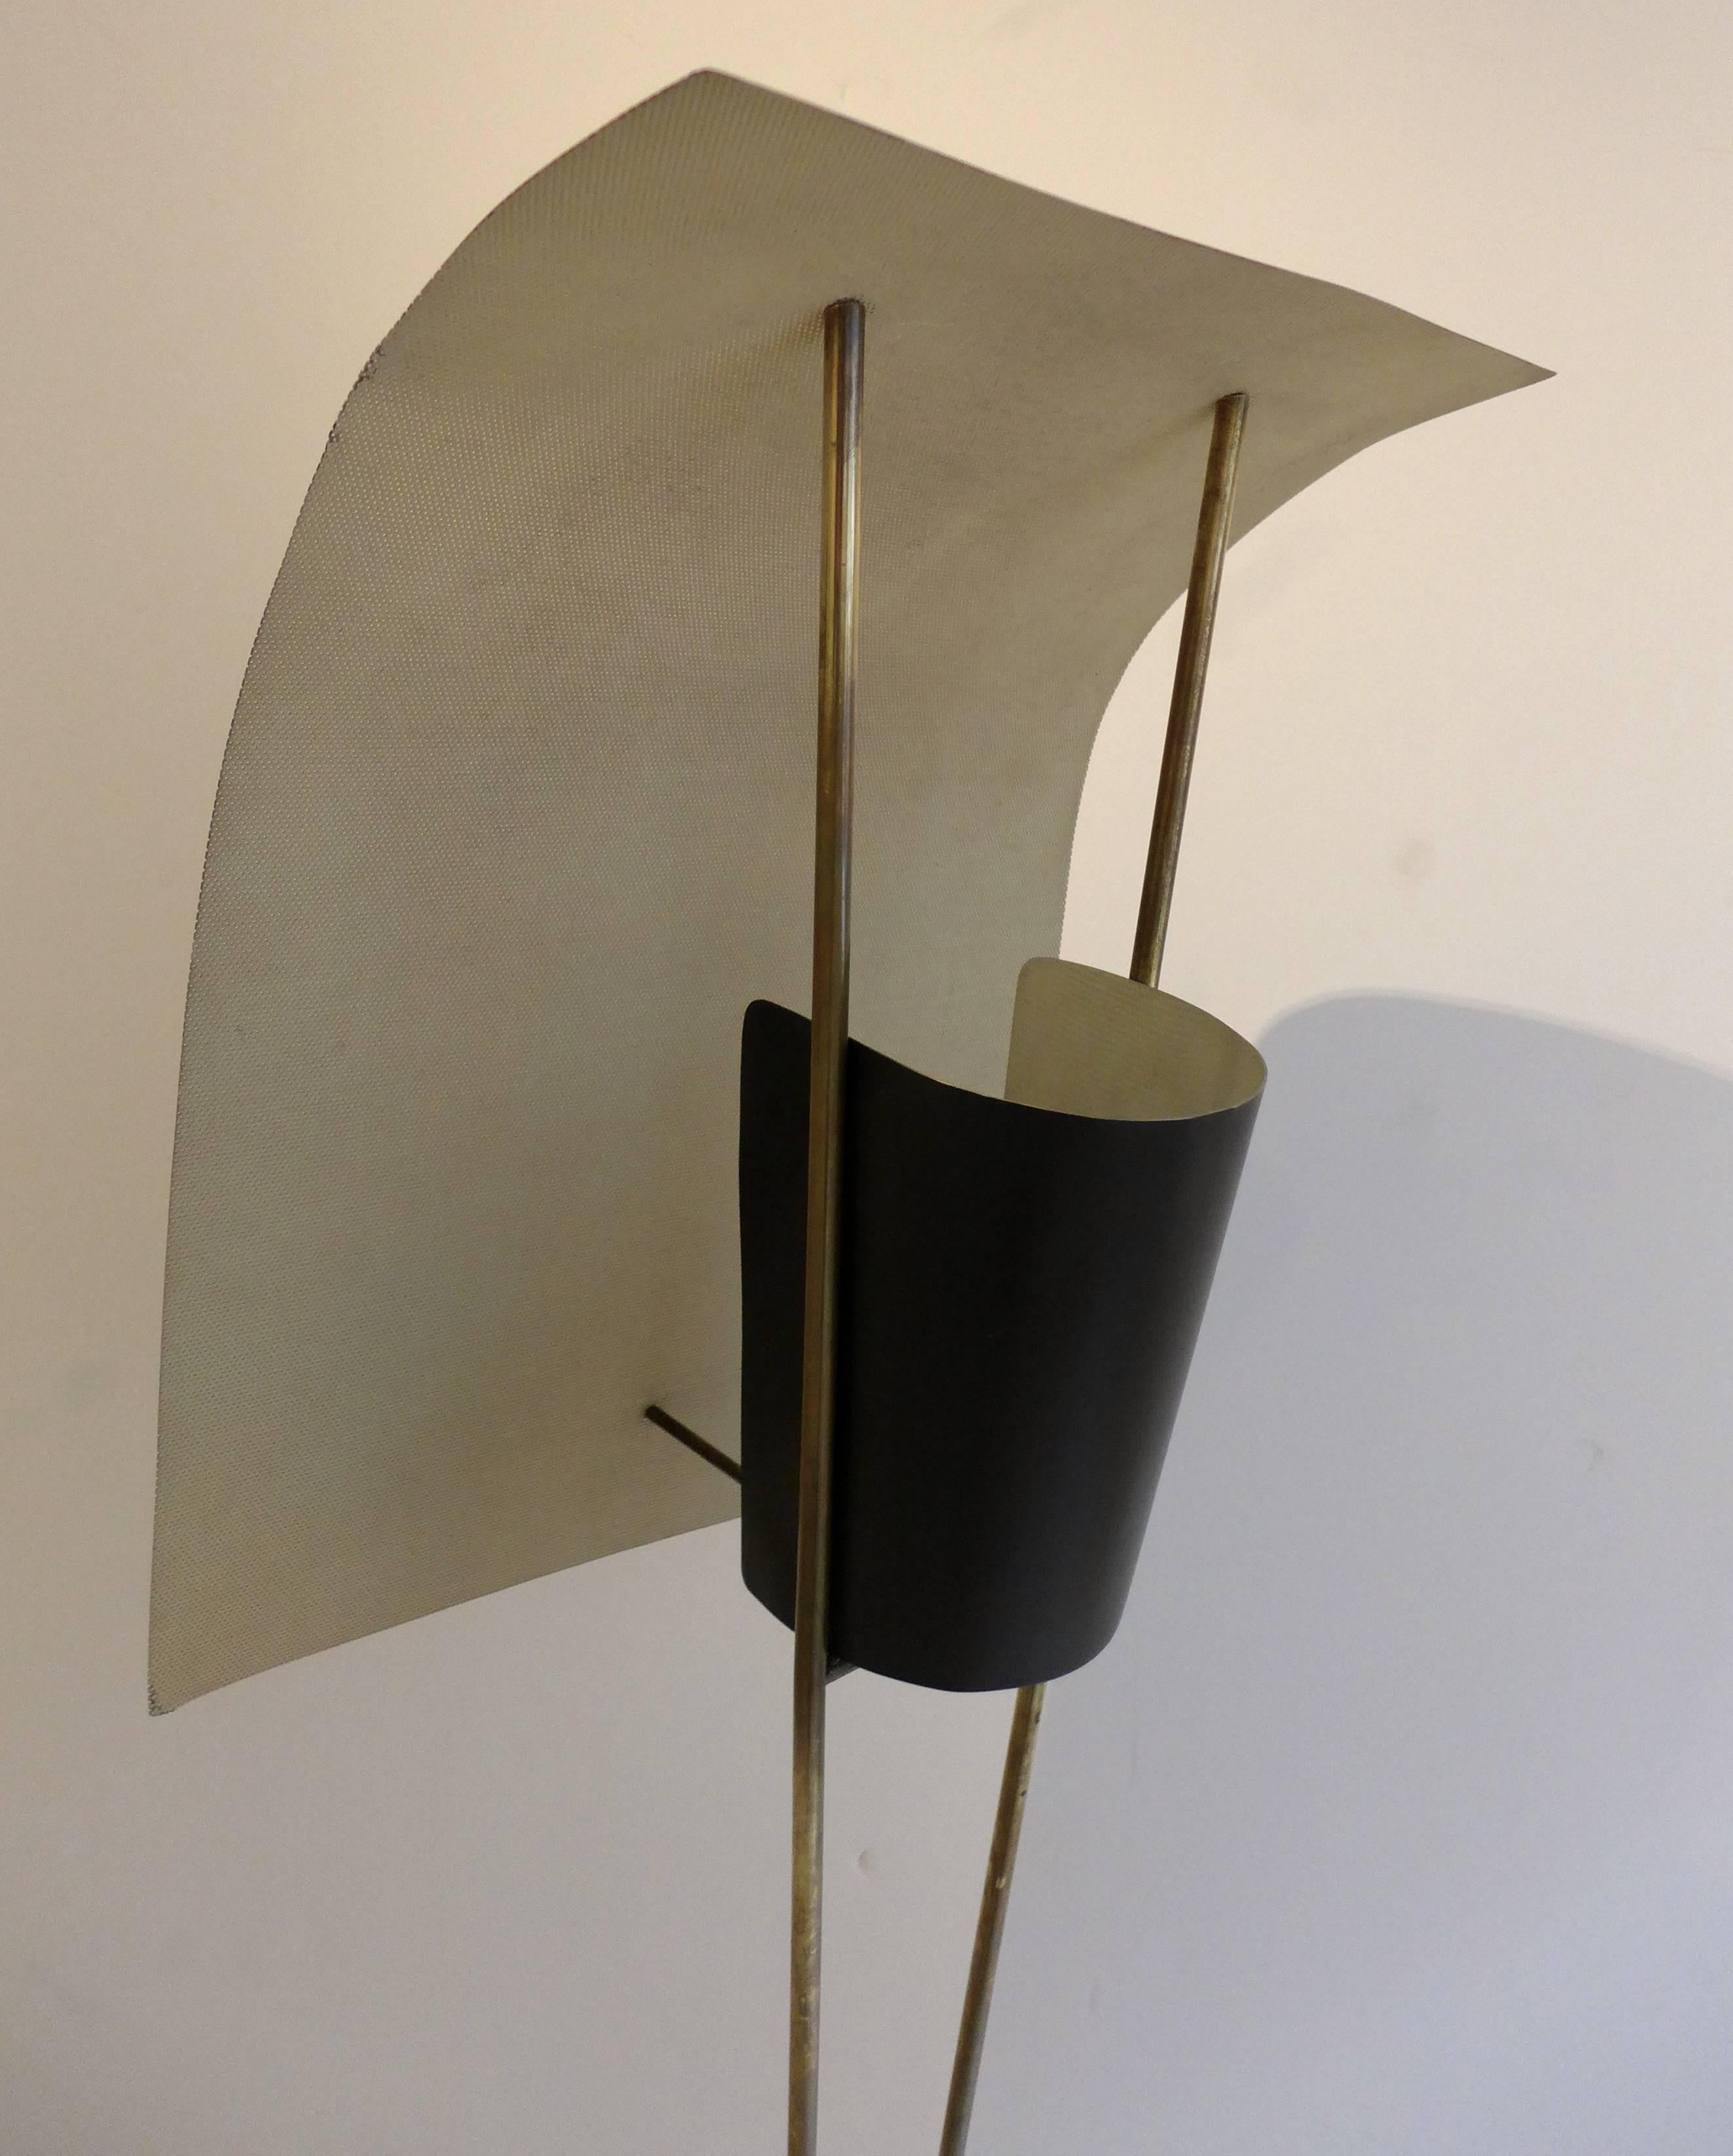 Cerf-Volant (Kite) floor lamp, model G30, designed by Pierre Guariche and produced by Disderot, circa 1952. A classic Mid-Century lighting design, of perforated and enameled steel, enameled aluminum, and brass. In good original condition, with